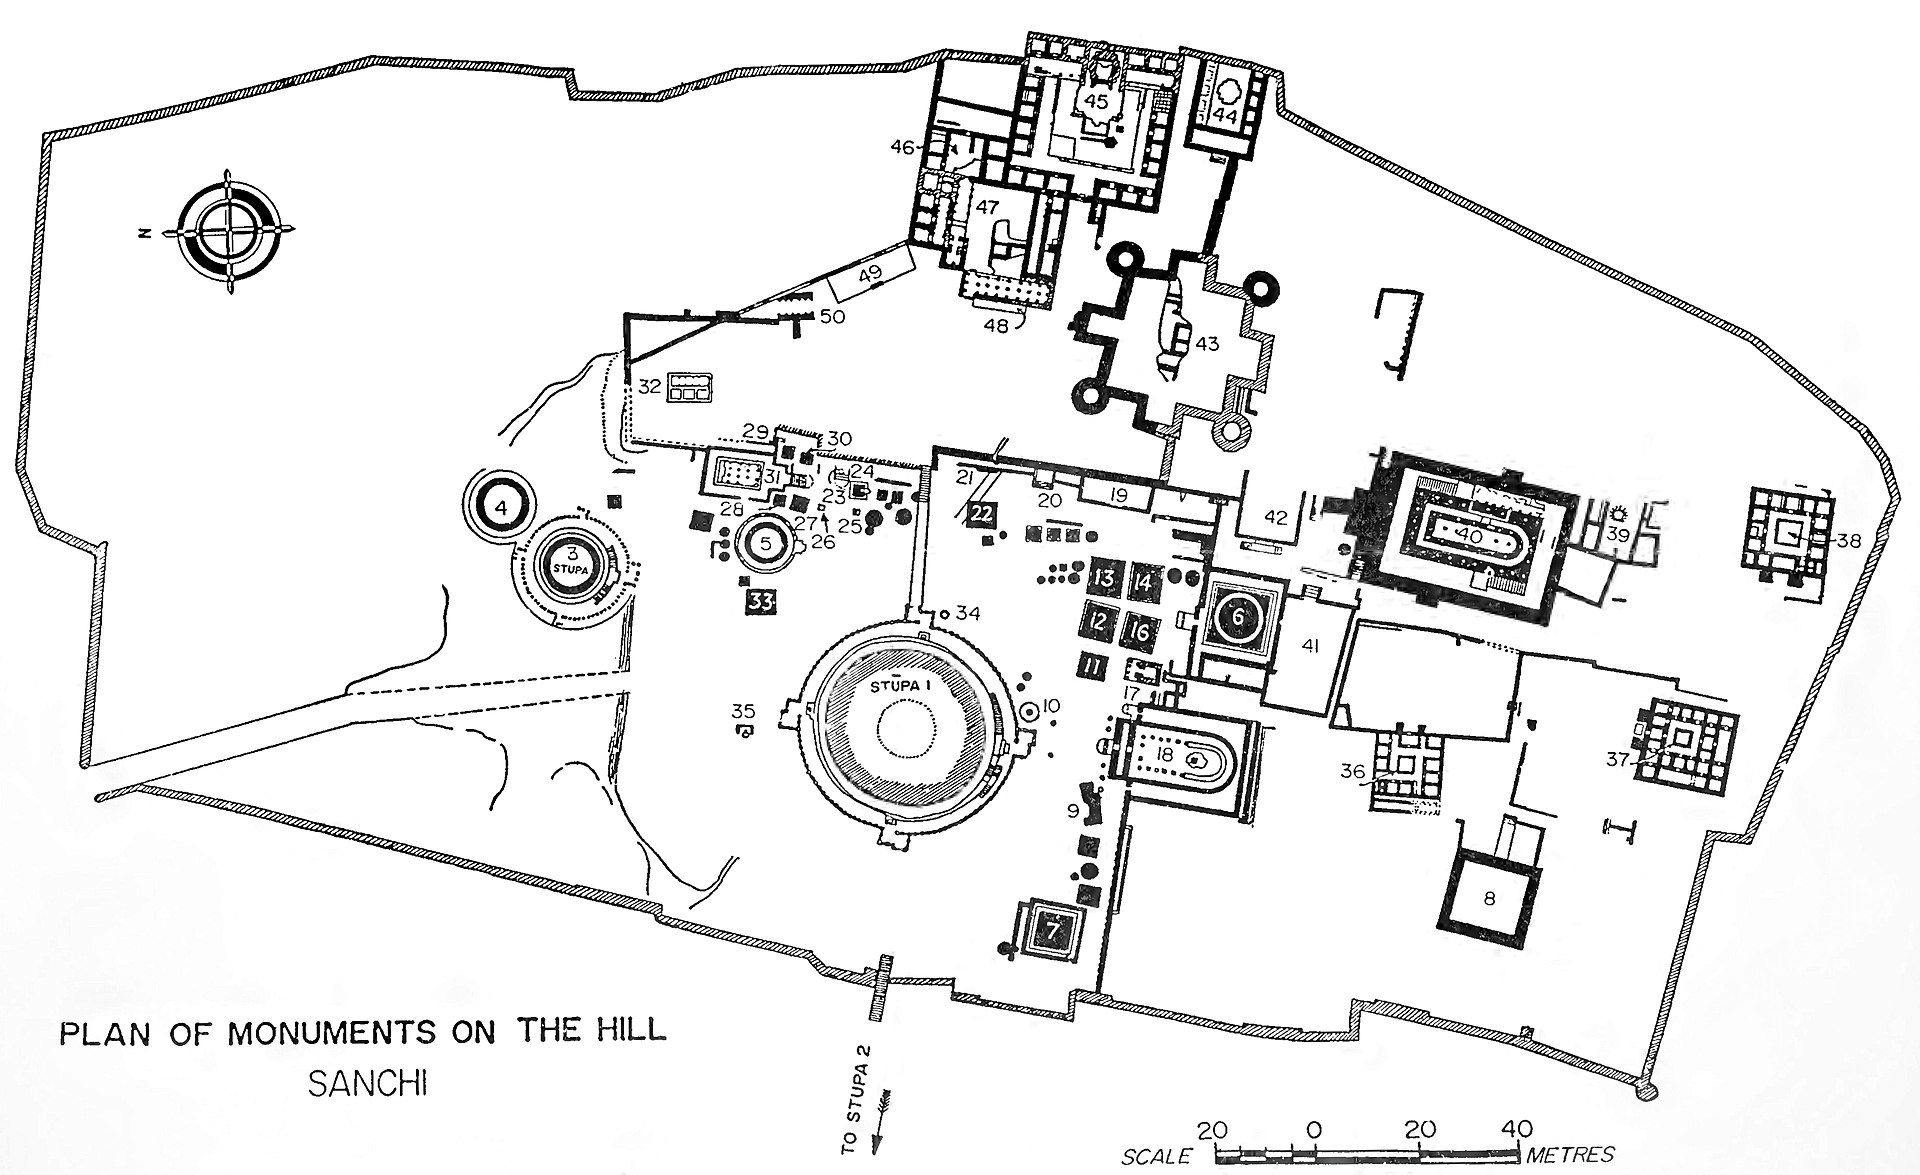 Plan of the monuments of the hill of Sanchi, numbered 1 to 50 